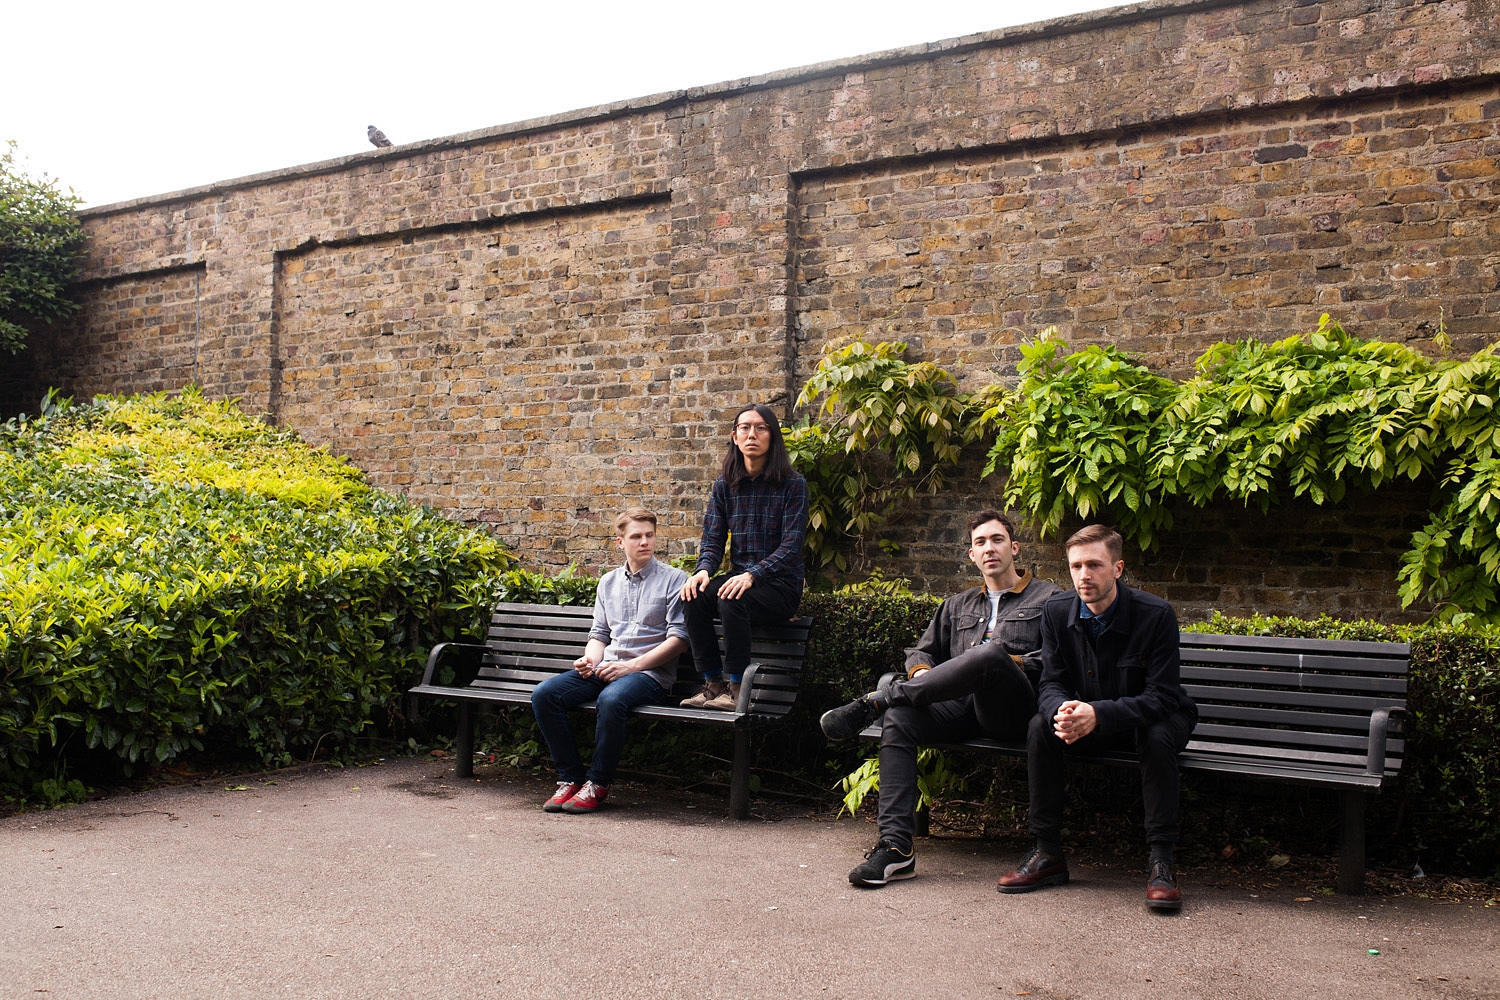 Teleman: "It’s about mixing business and pleasure."